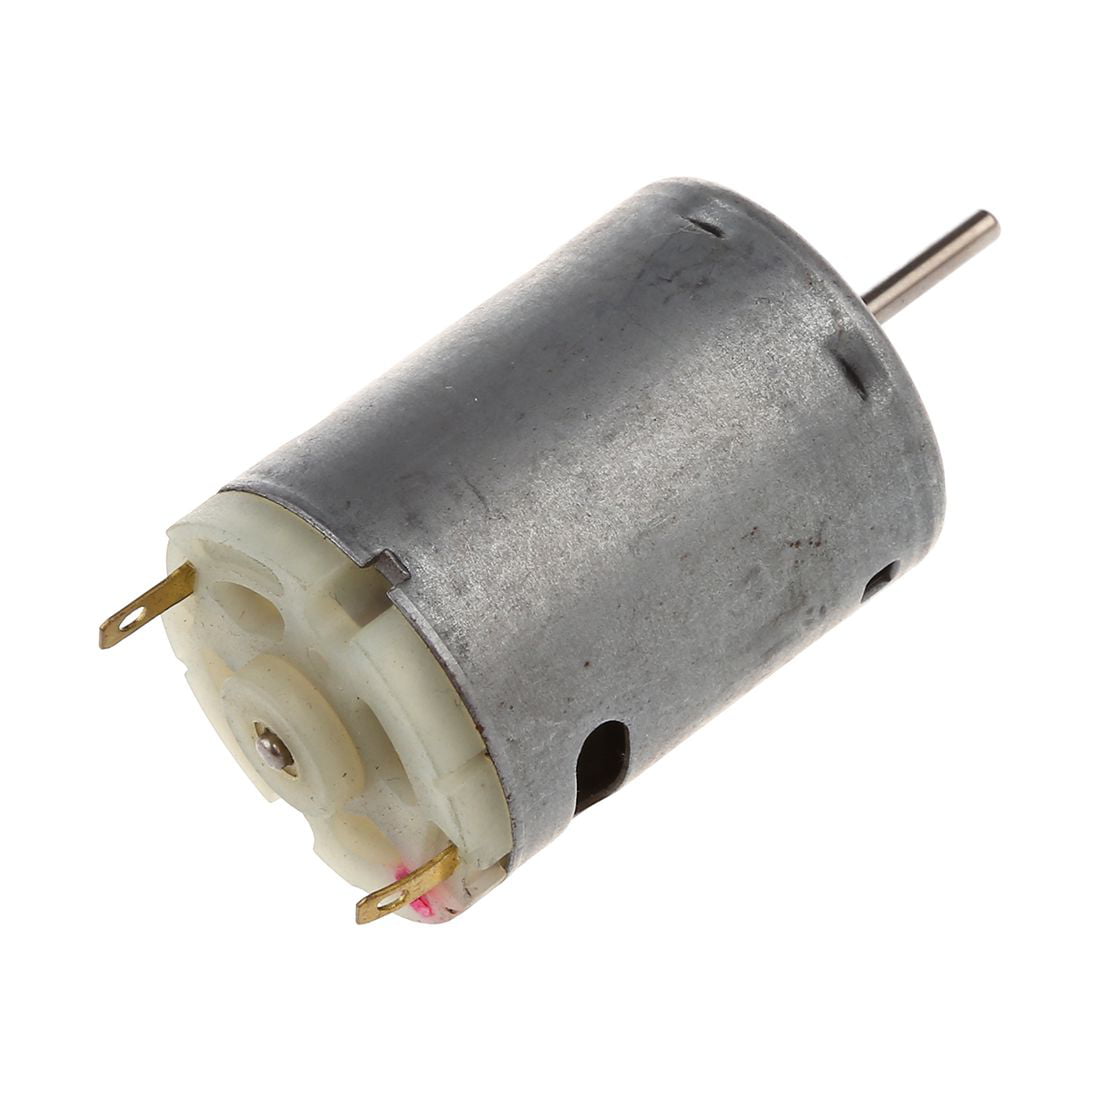 12V DC 4559RPM Torque Magnetic Mini Electric Motor for DIY Toys Cars HICA 